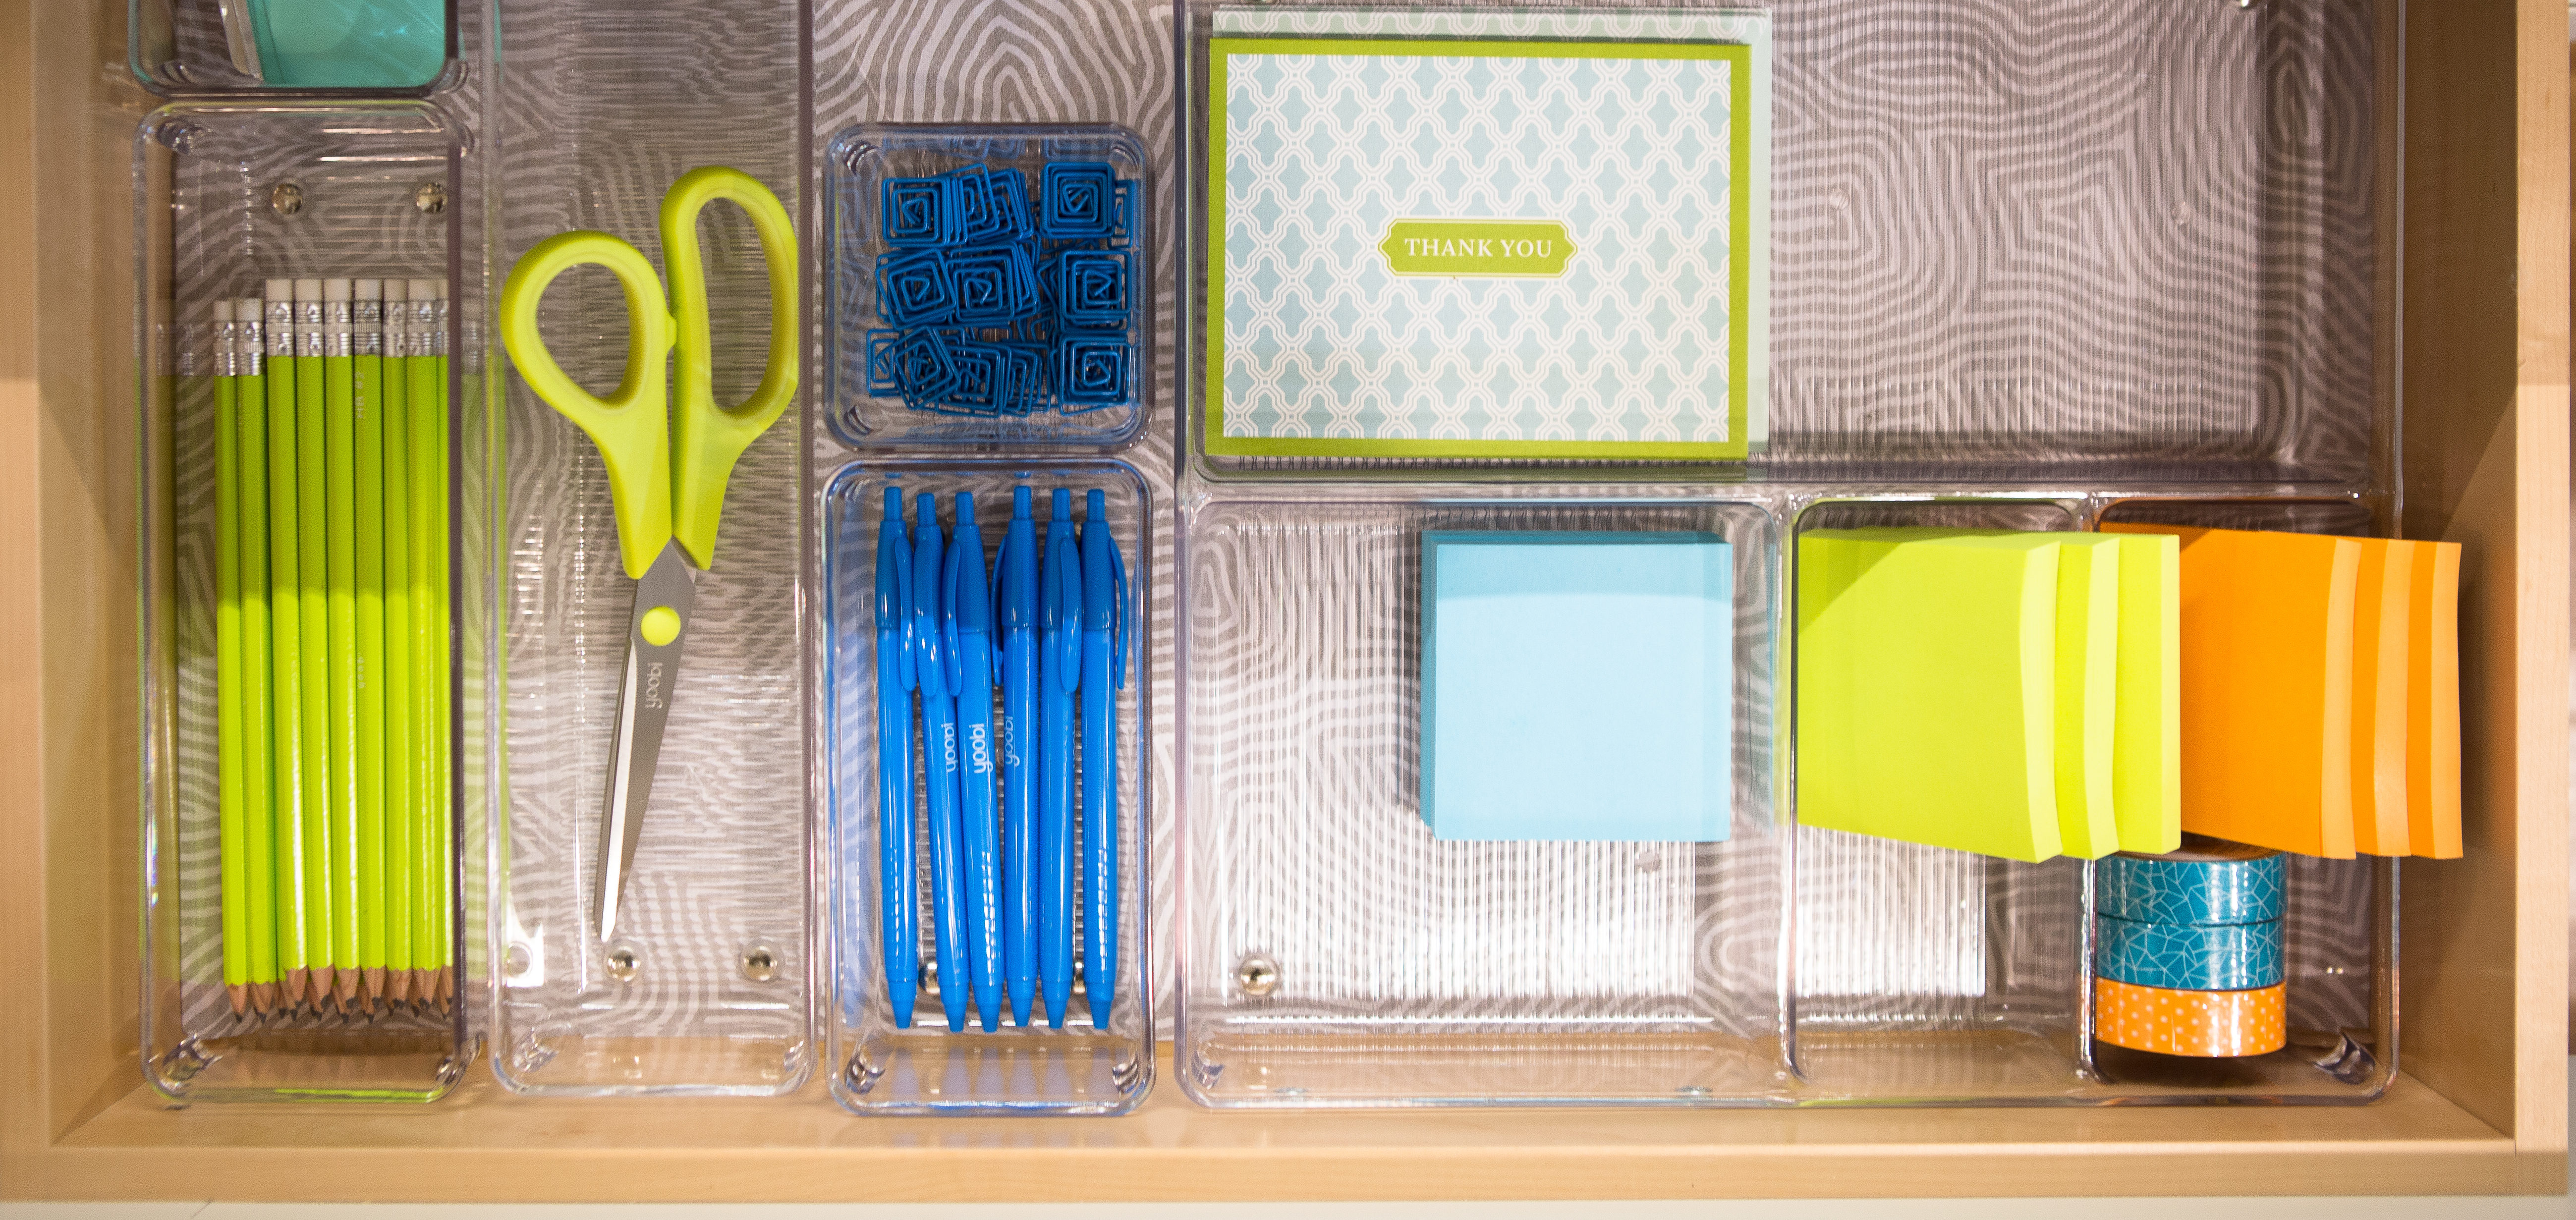 organized office drawer with sticky notes and scissors